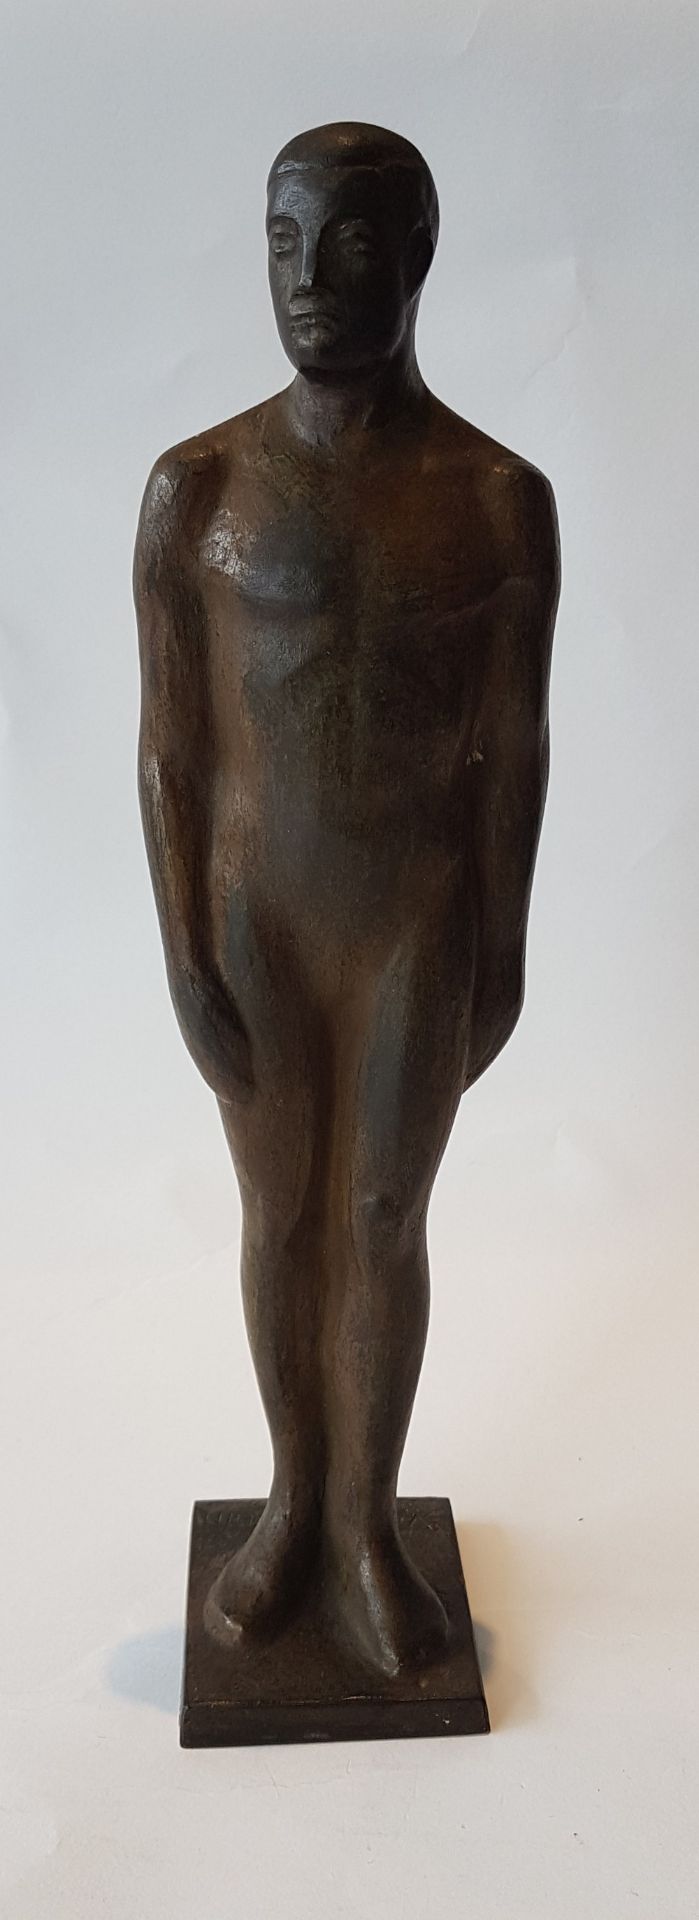 Louis van Cutsem (1909-1992) Male nude; Bronze sculpture with green-brown shaded patina. Signed on